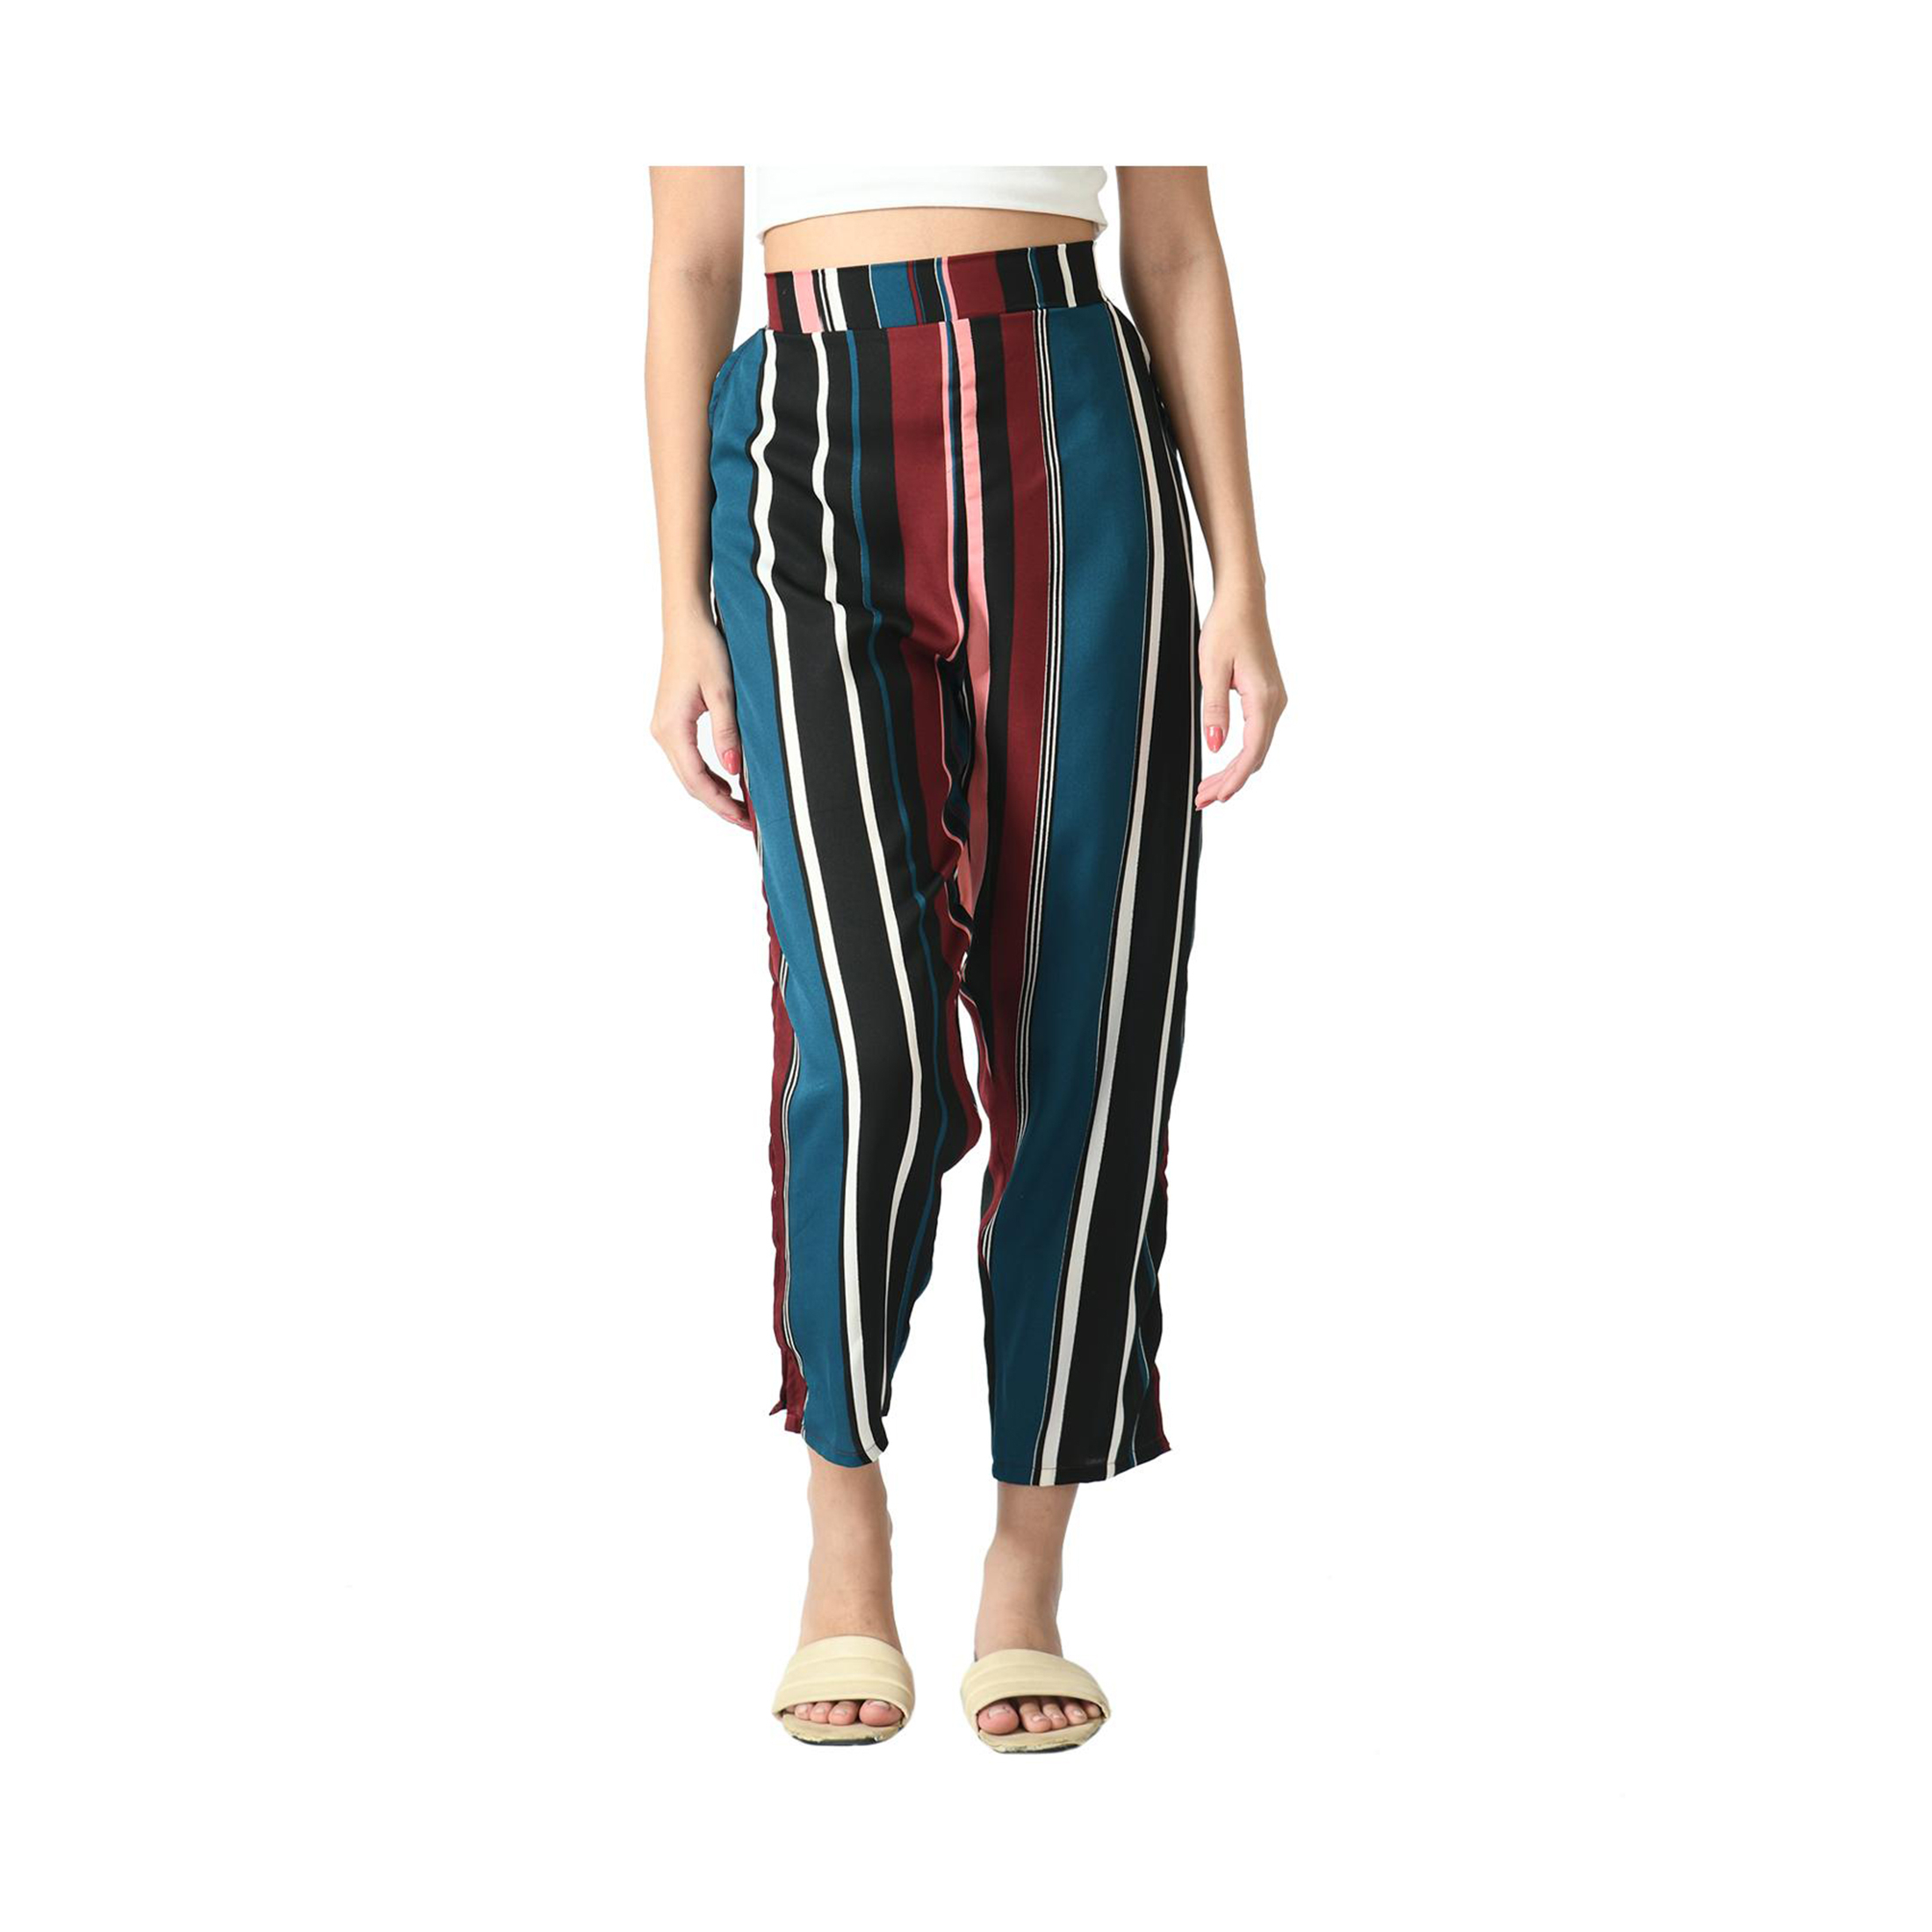 3-Pack: Ladies Striped High Waisted Summer Soft Wide Open Boho Leg Palazzo Pants - Large